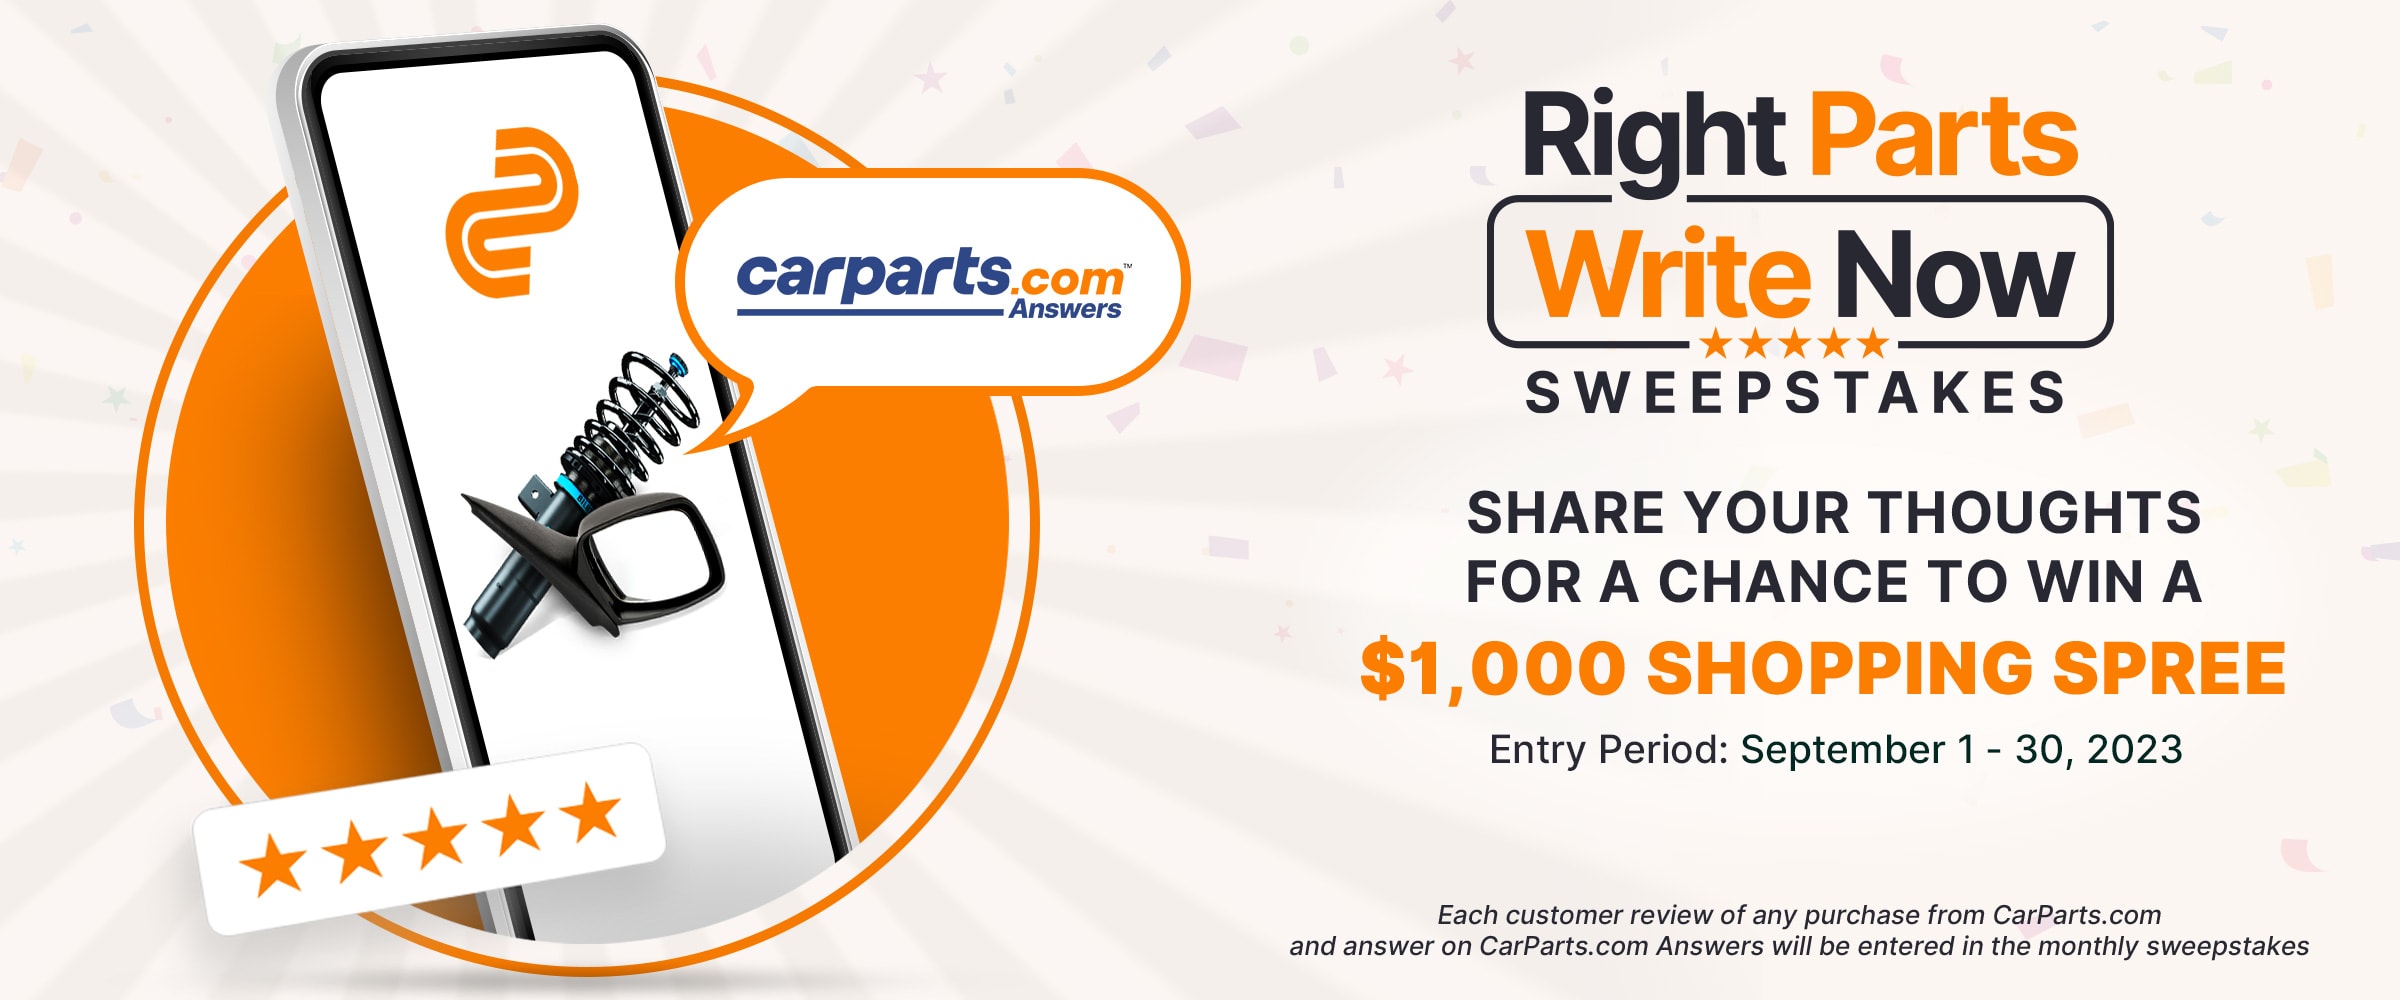 CarParts.com Right Parts, Write Now Sweepstakes